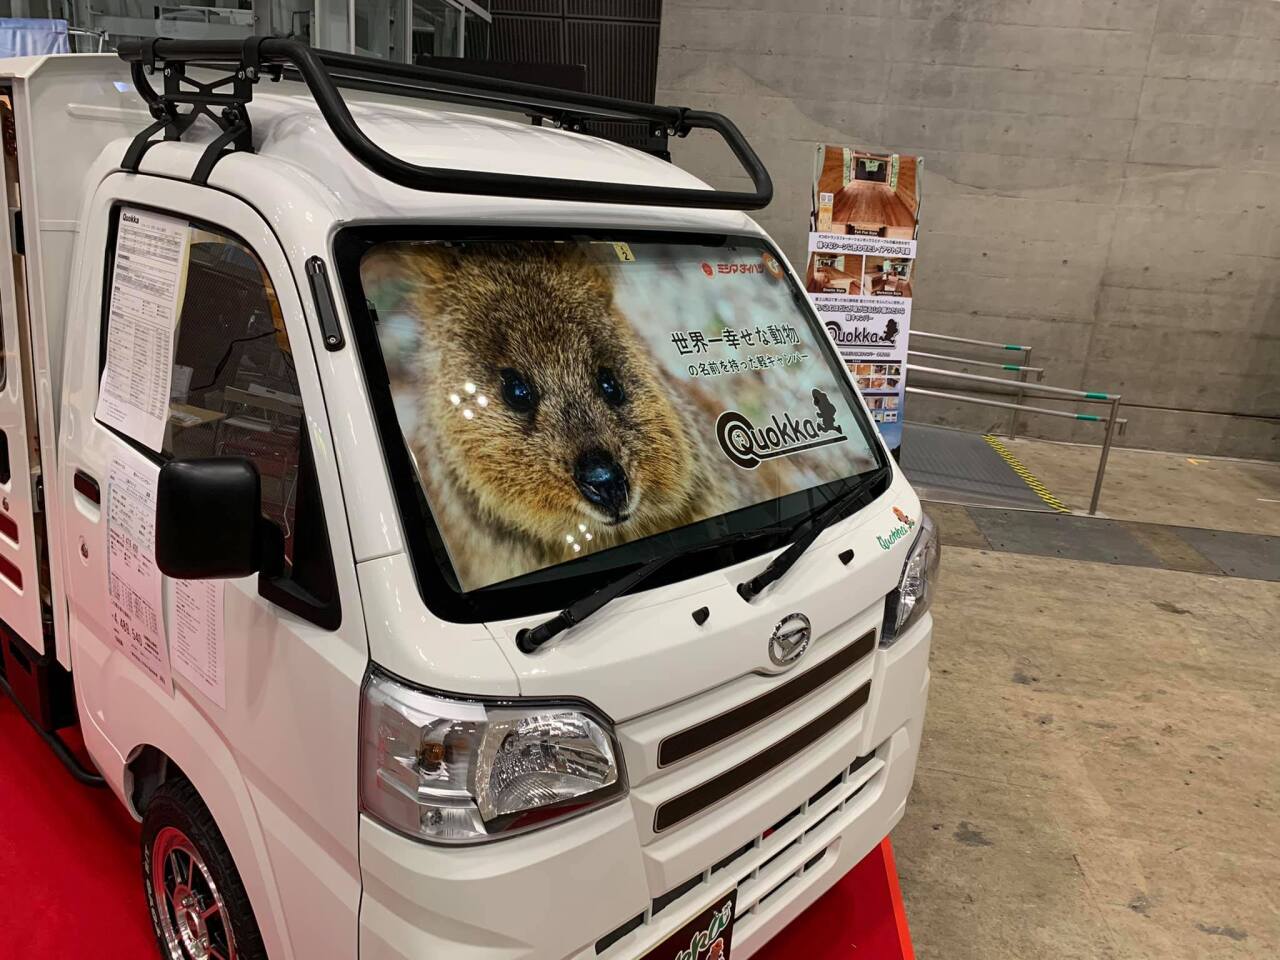 The Quokka micro-camper is quite adorable but perhaps not quite as adorable as the marsupial after which it's named